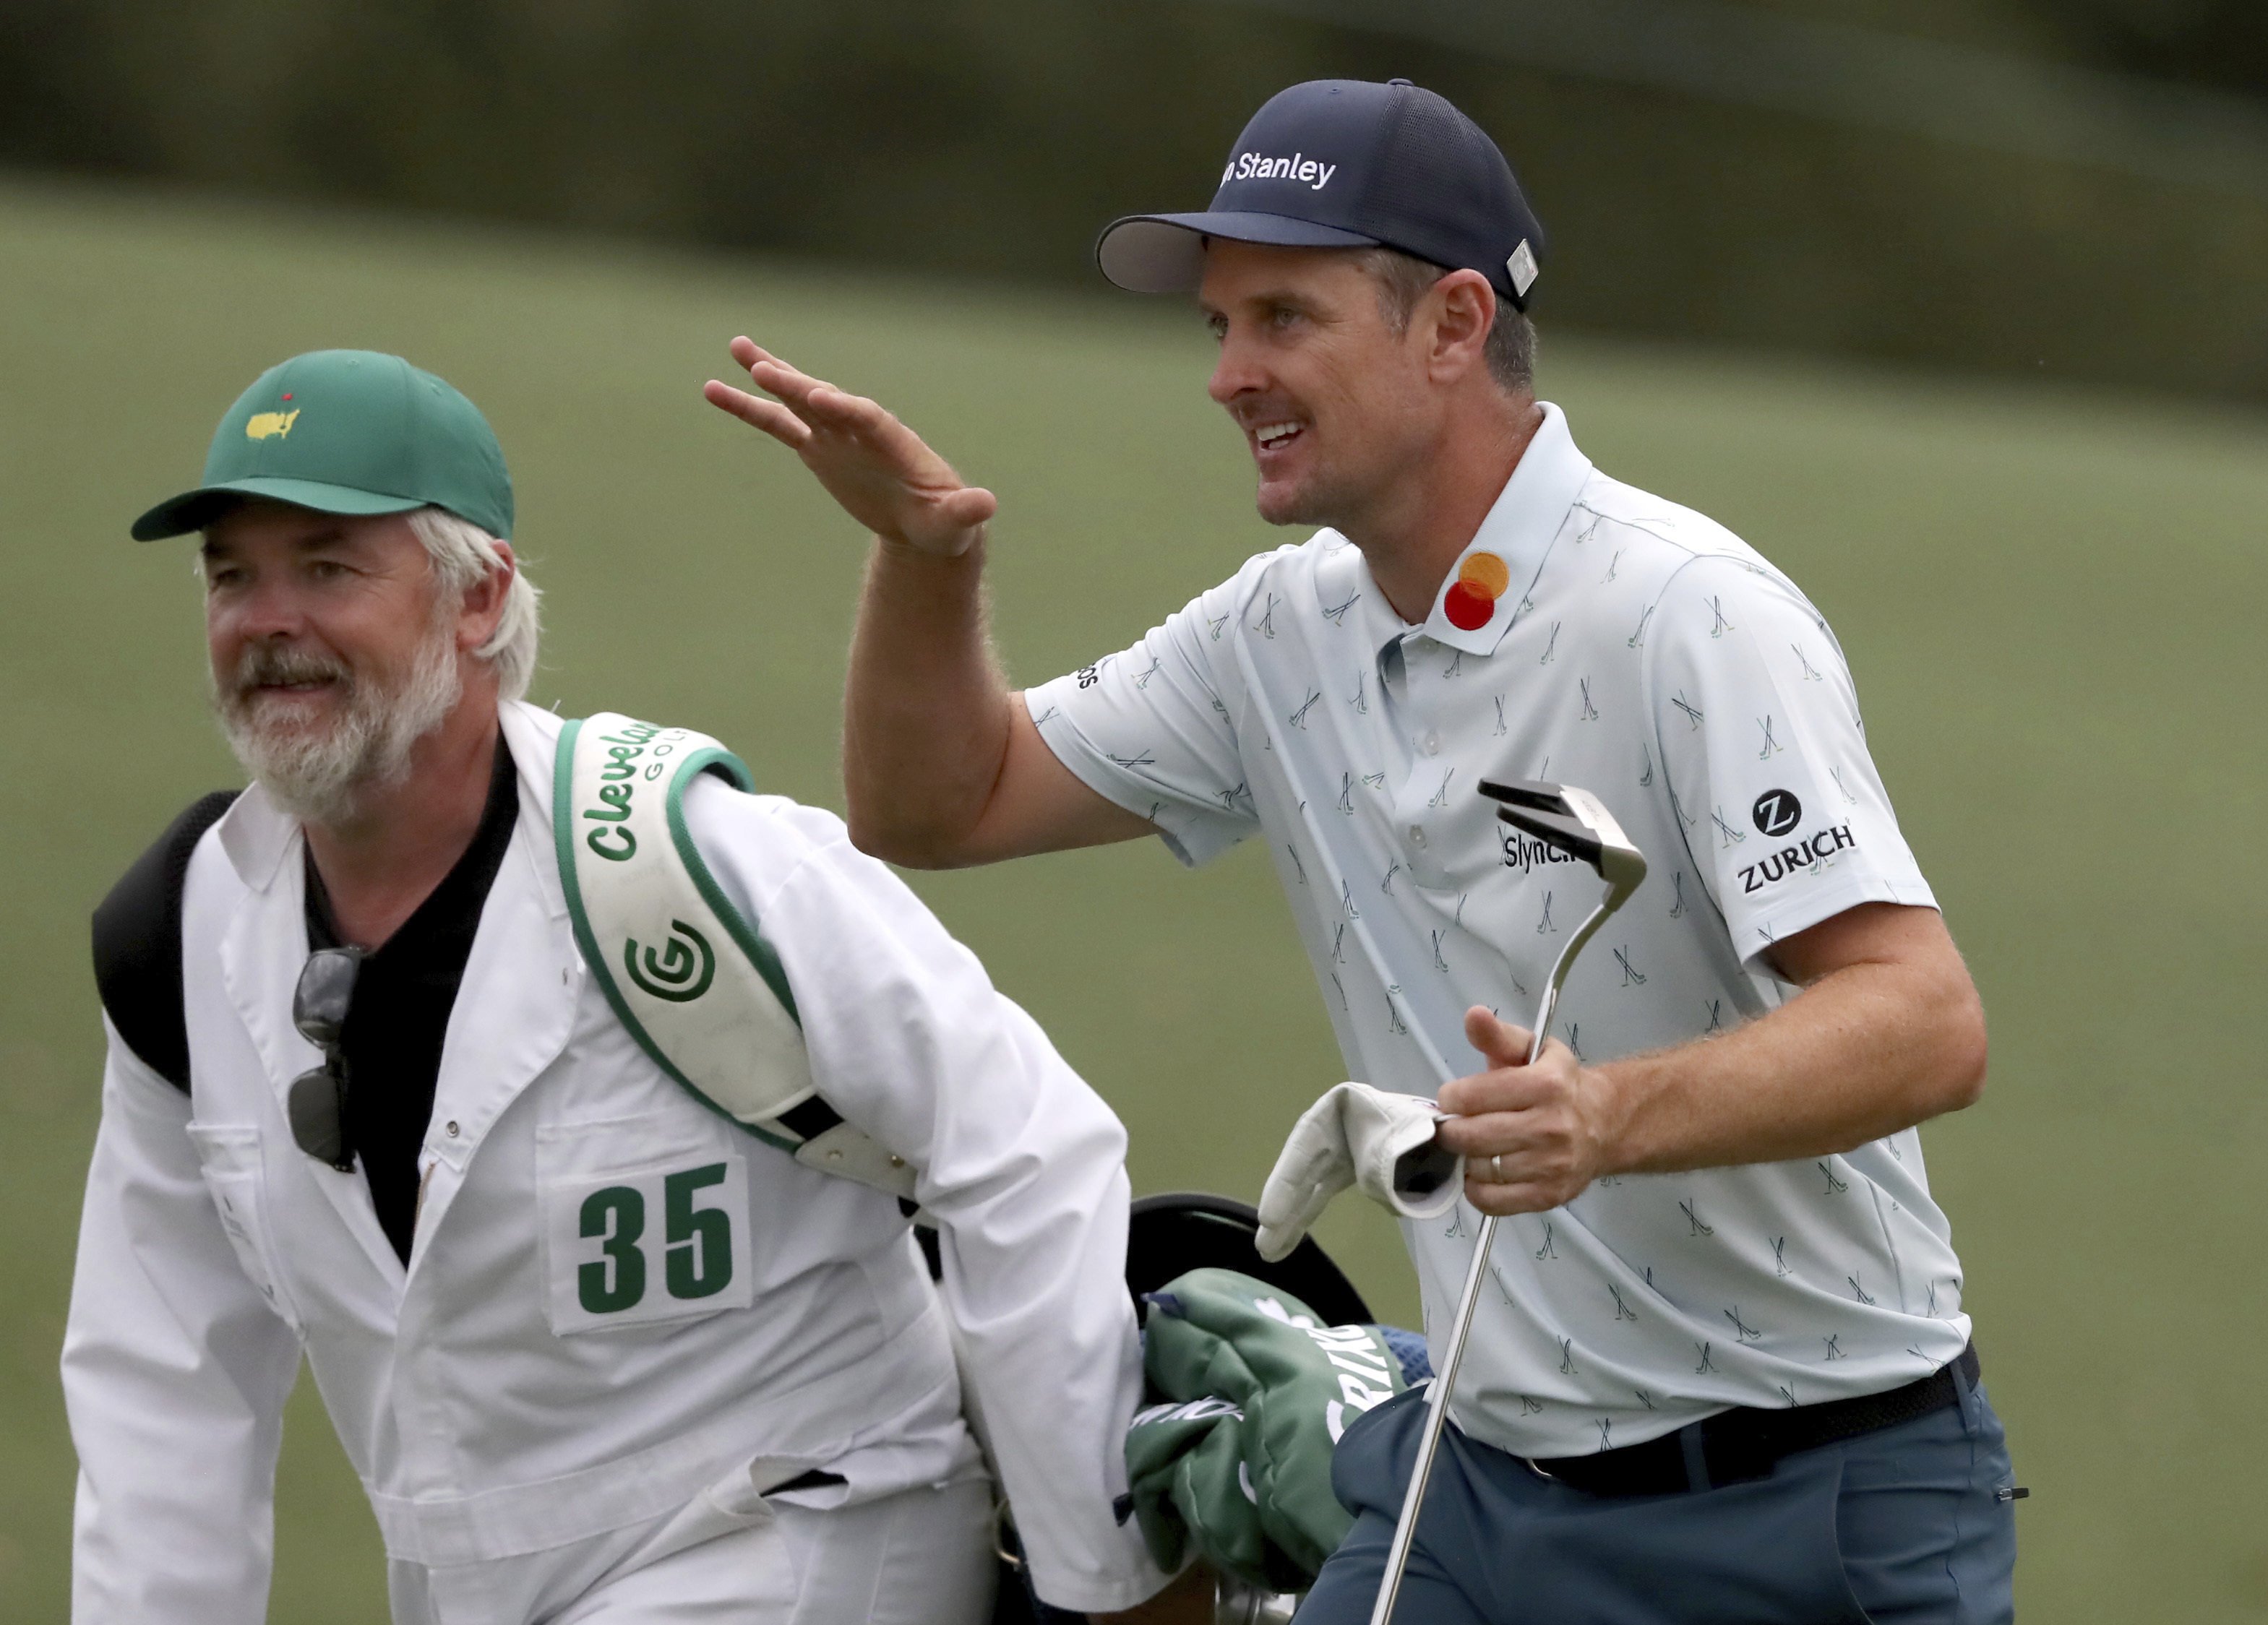 England’s Justin Rose holds the lead after round one of the Masters in Georgia. Photo: AP